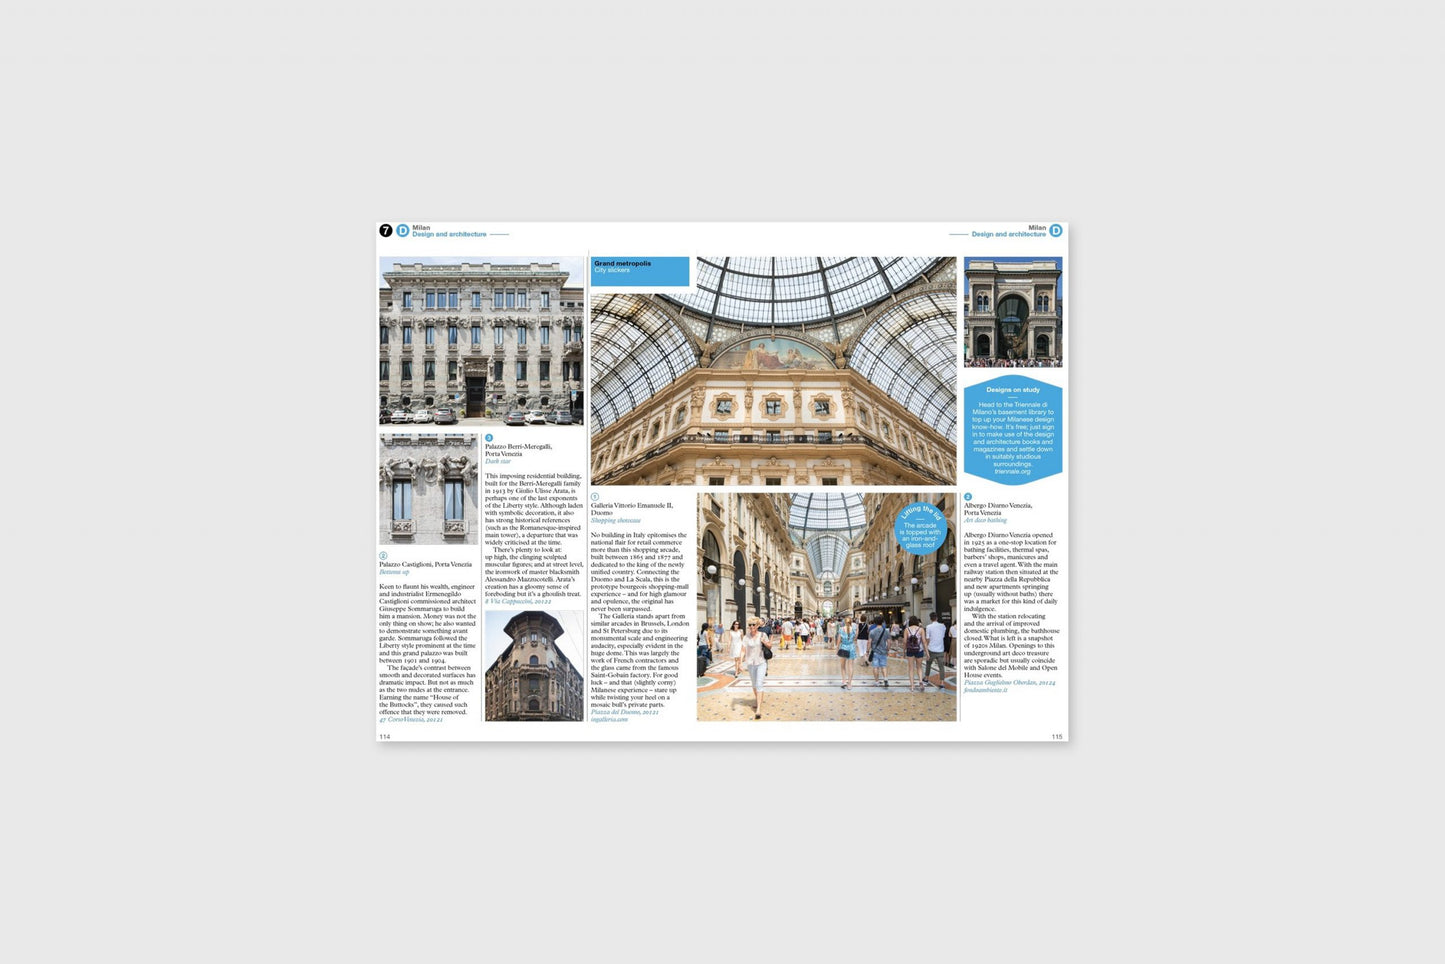 Milan: The Monocle Travel Guide Series